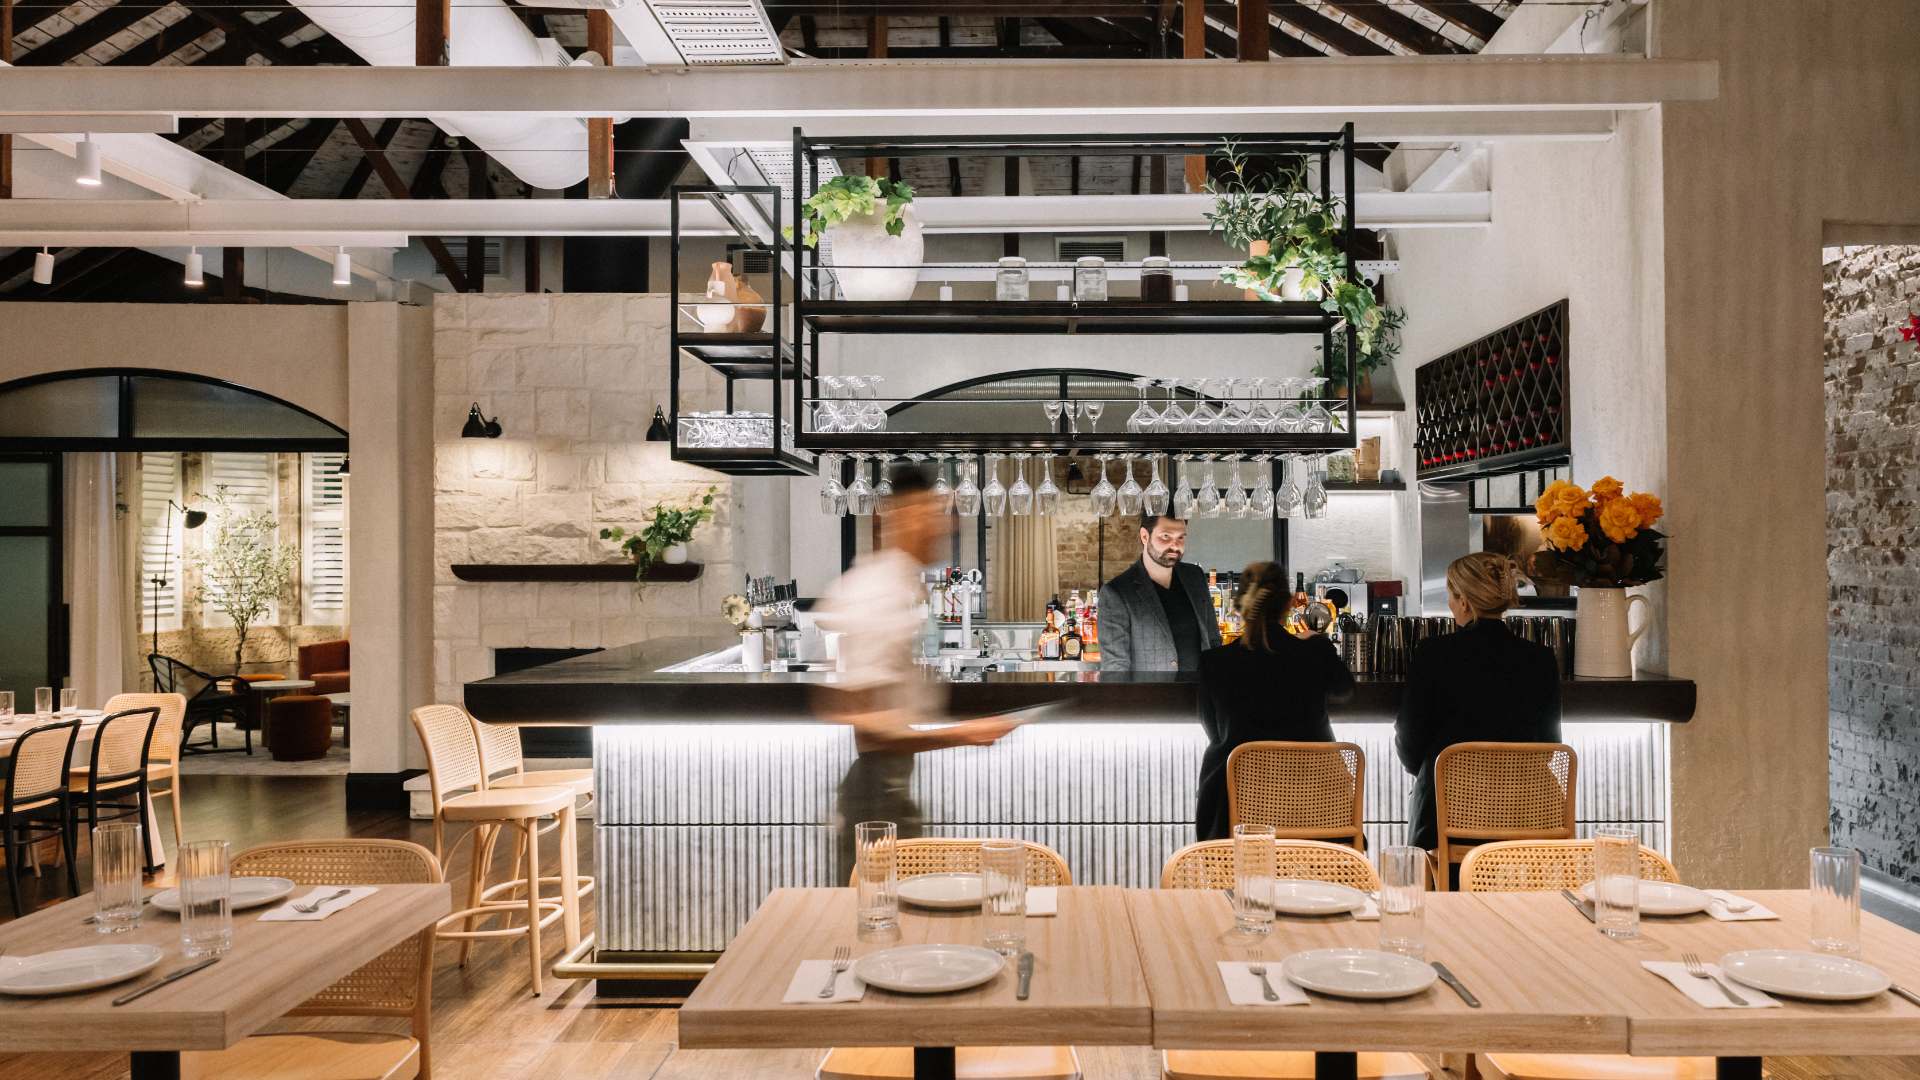 Justin North Has Opened His New Greek-Inspired Restaurant Sofia Above Bar Cleveland in Surry Hills